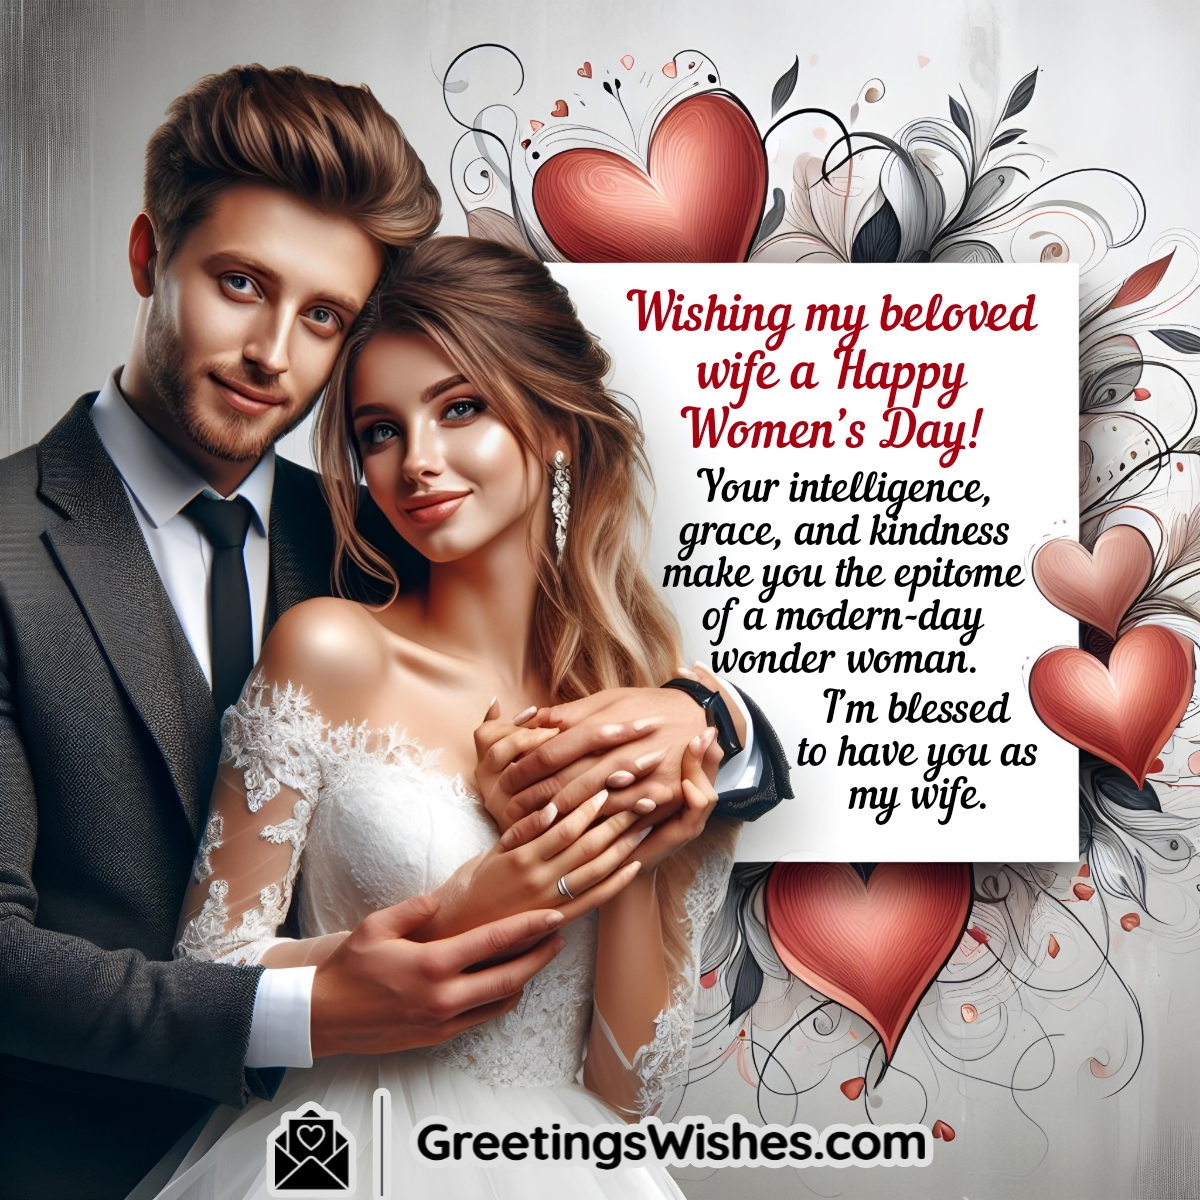 Women’s Day Wish For Wife